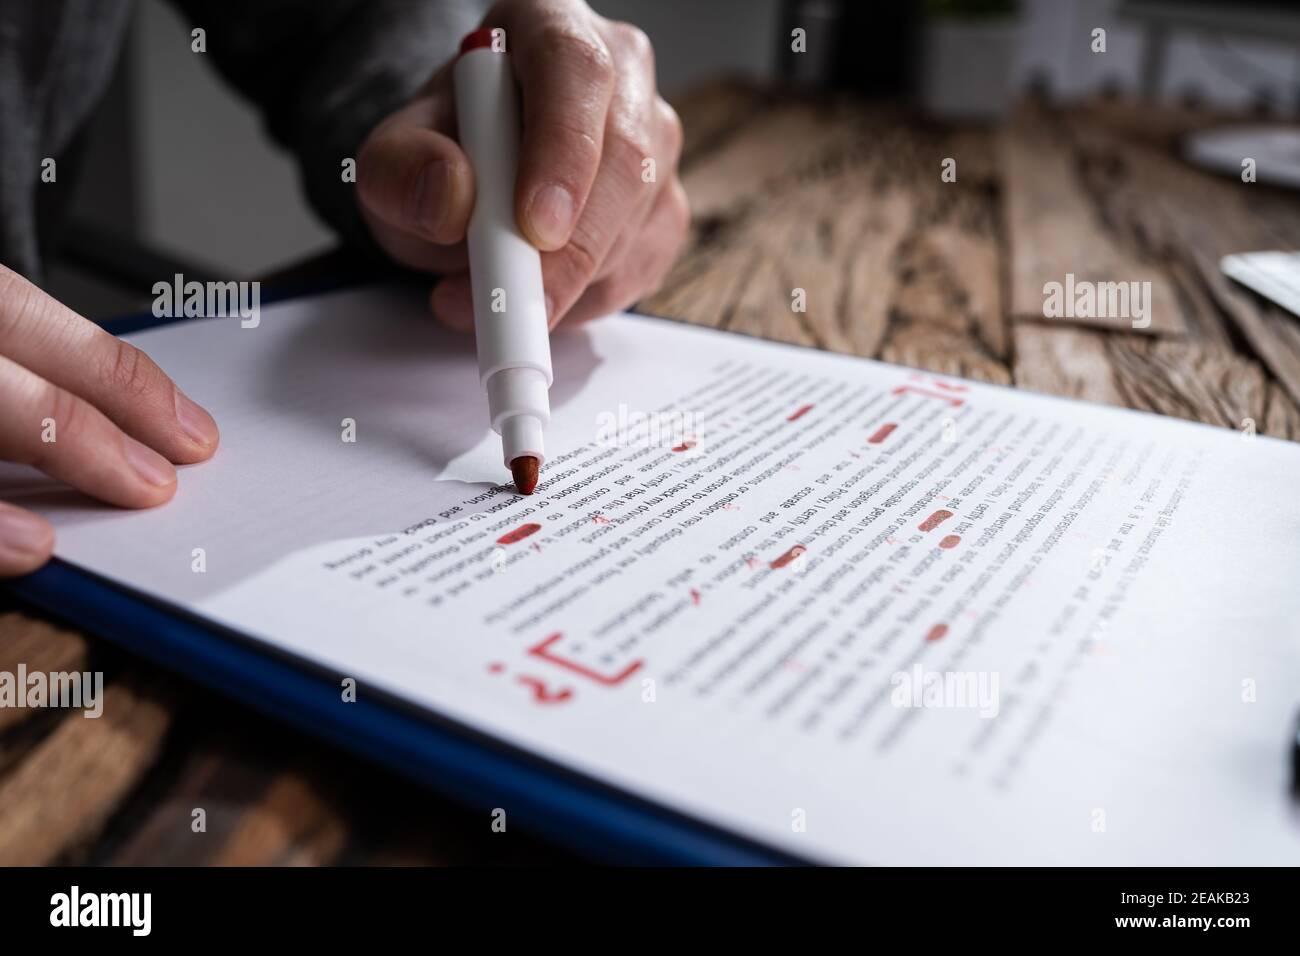 Script Proofread And Sentence Grammar Spell Check Stock Photo